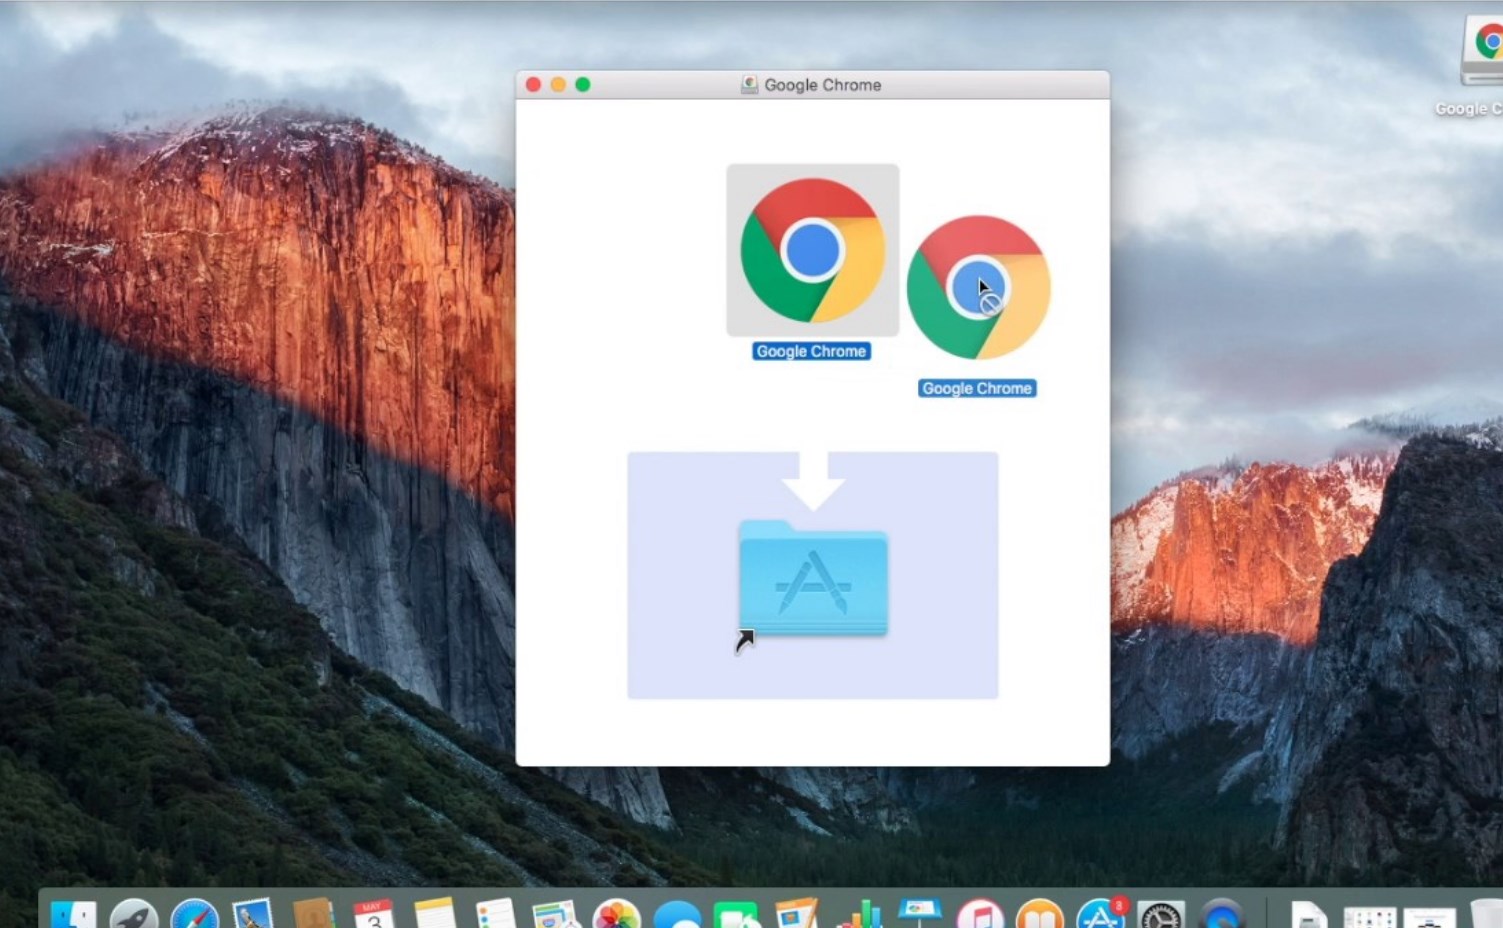 How to Download Google Chrome on Mac